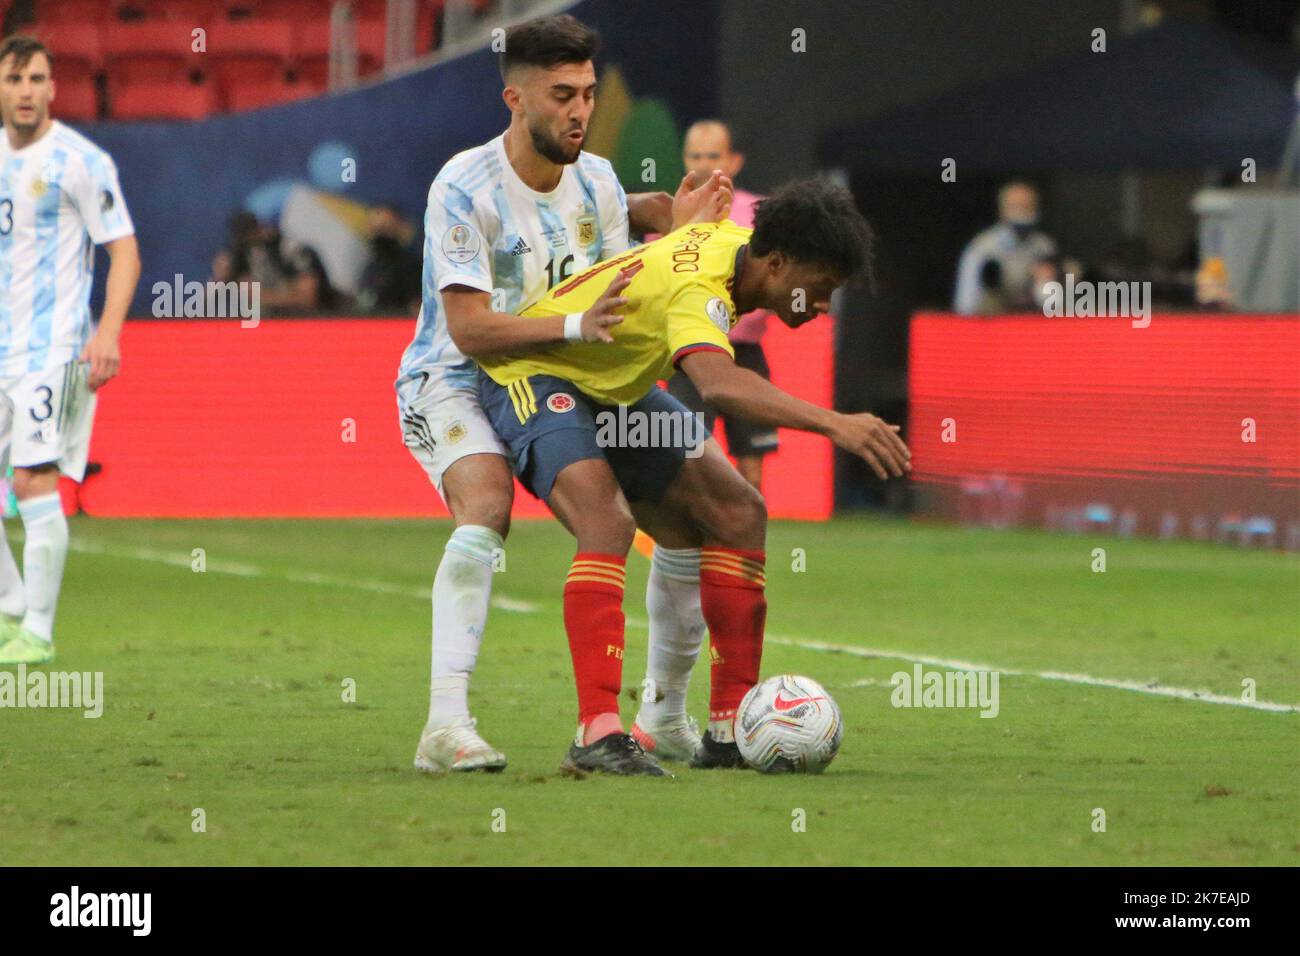 ©Laurent Lairys/MAXPPP - J Cuandrado of Colombia and N Gonzales of Argentina during the Copa America 2021, semi-final football match between Argentina and Colombia on July 6, 2021 at Estádio Nacional Mané Garrincha in Brasilia, Brazil photos Laurent Lairys /MAXPPP Stock Photo